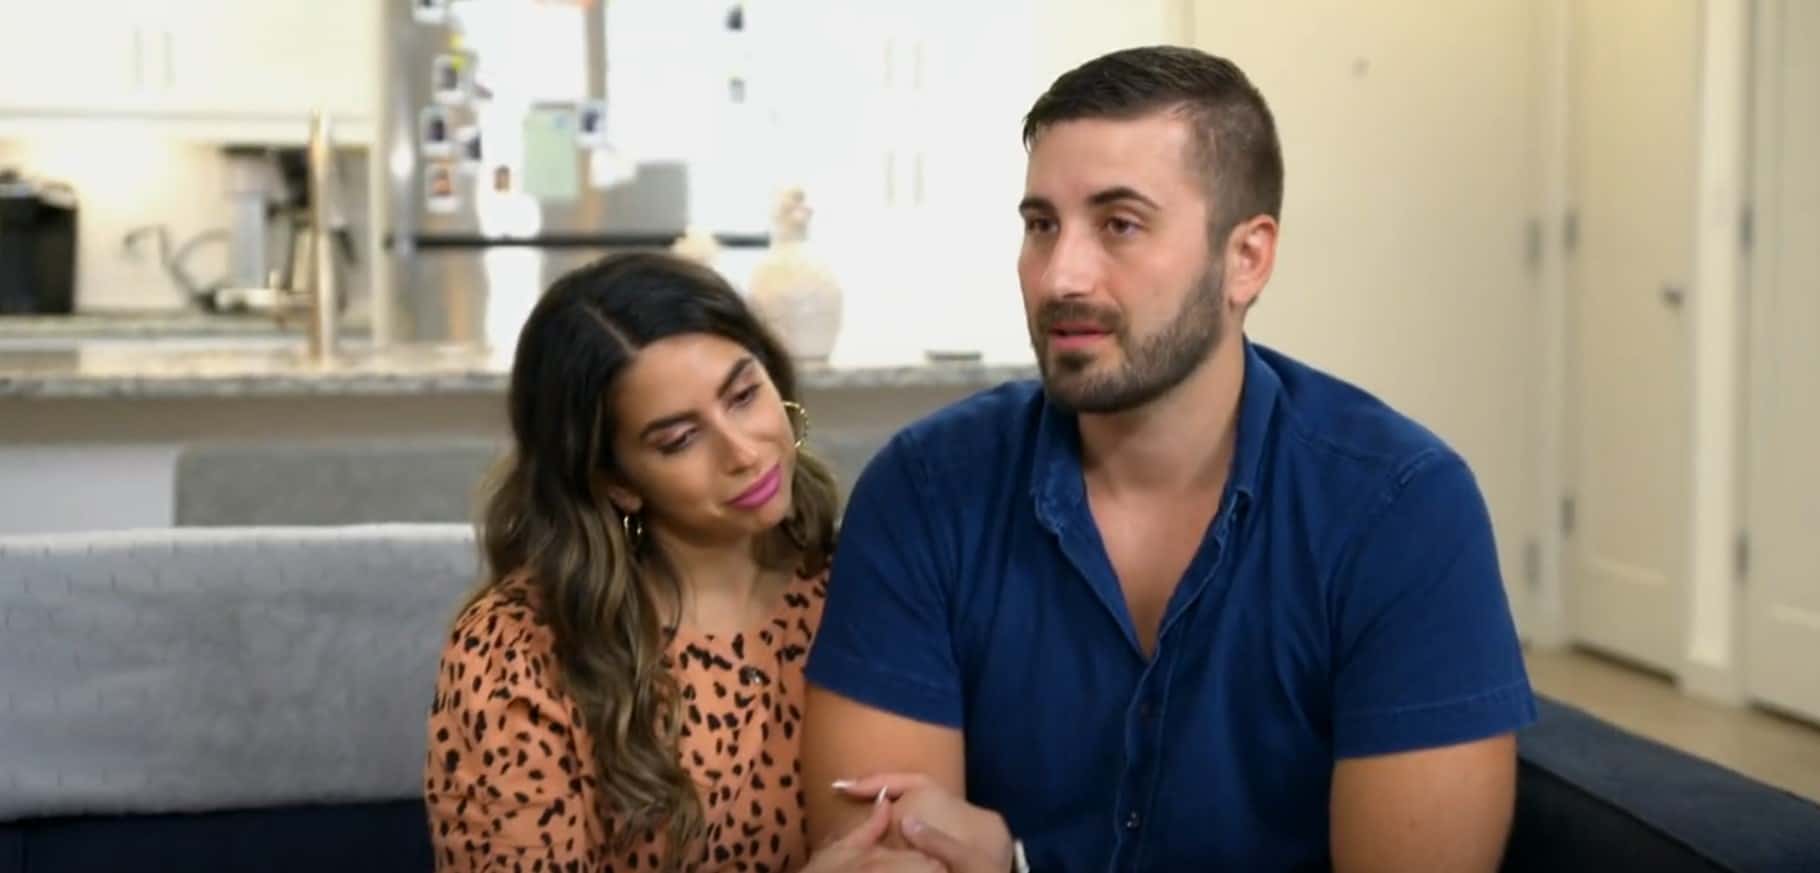 Married at First Sight USA